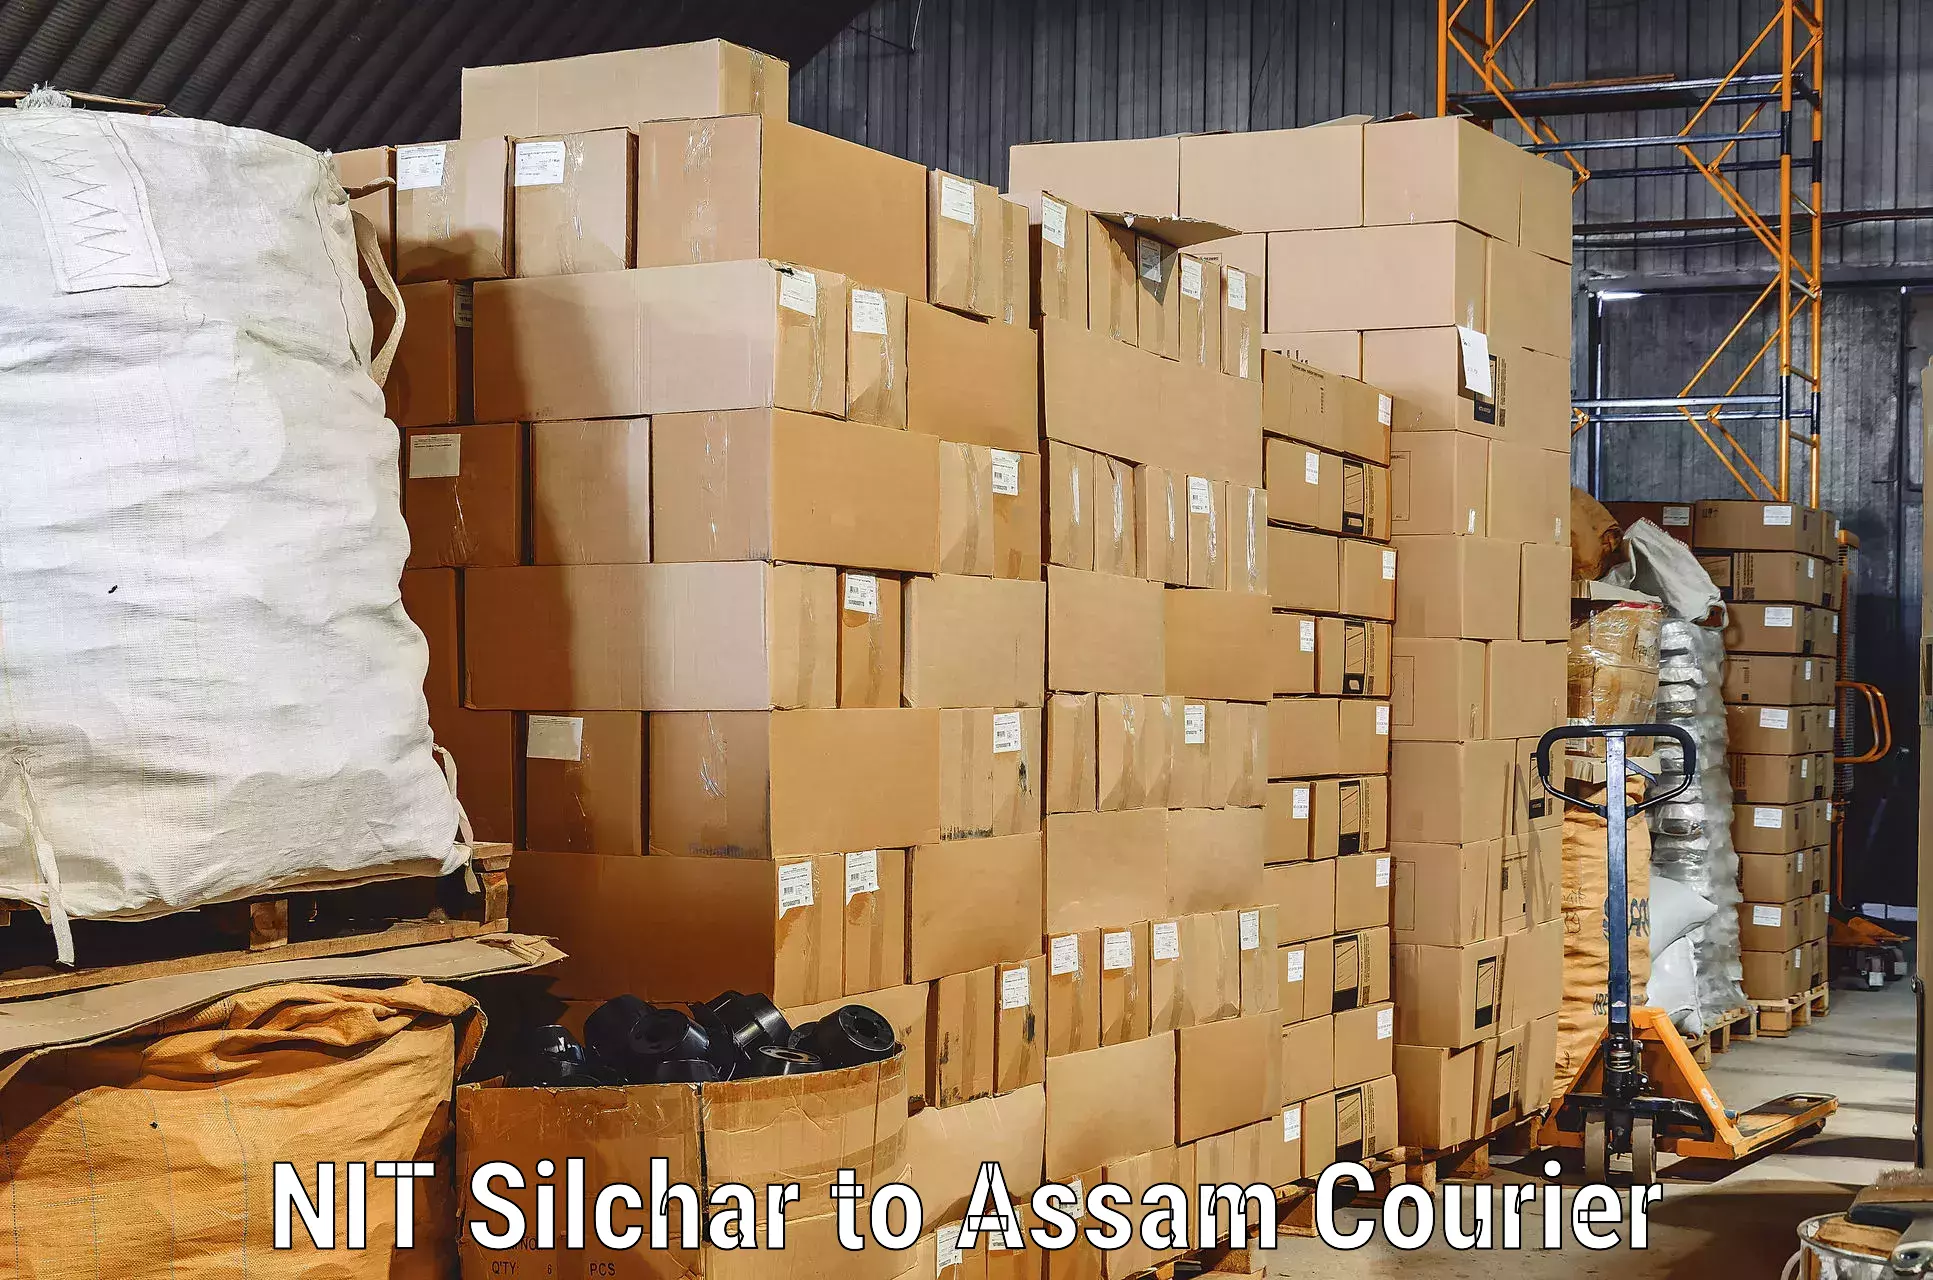 Seamless moving process NIT Silchar to Noonmati